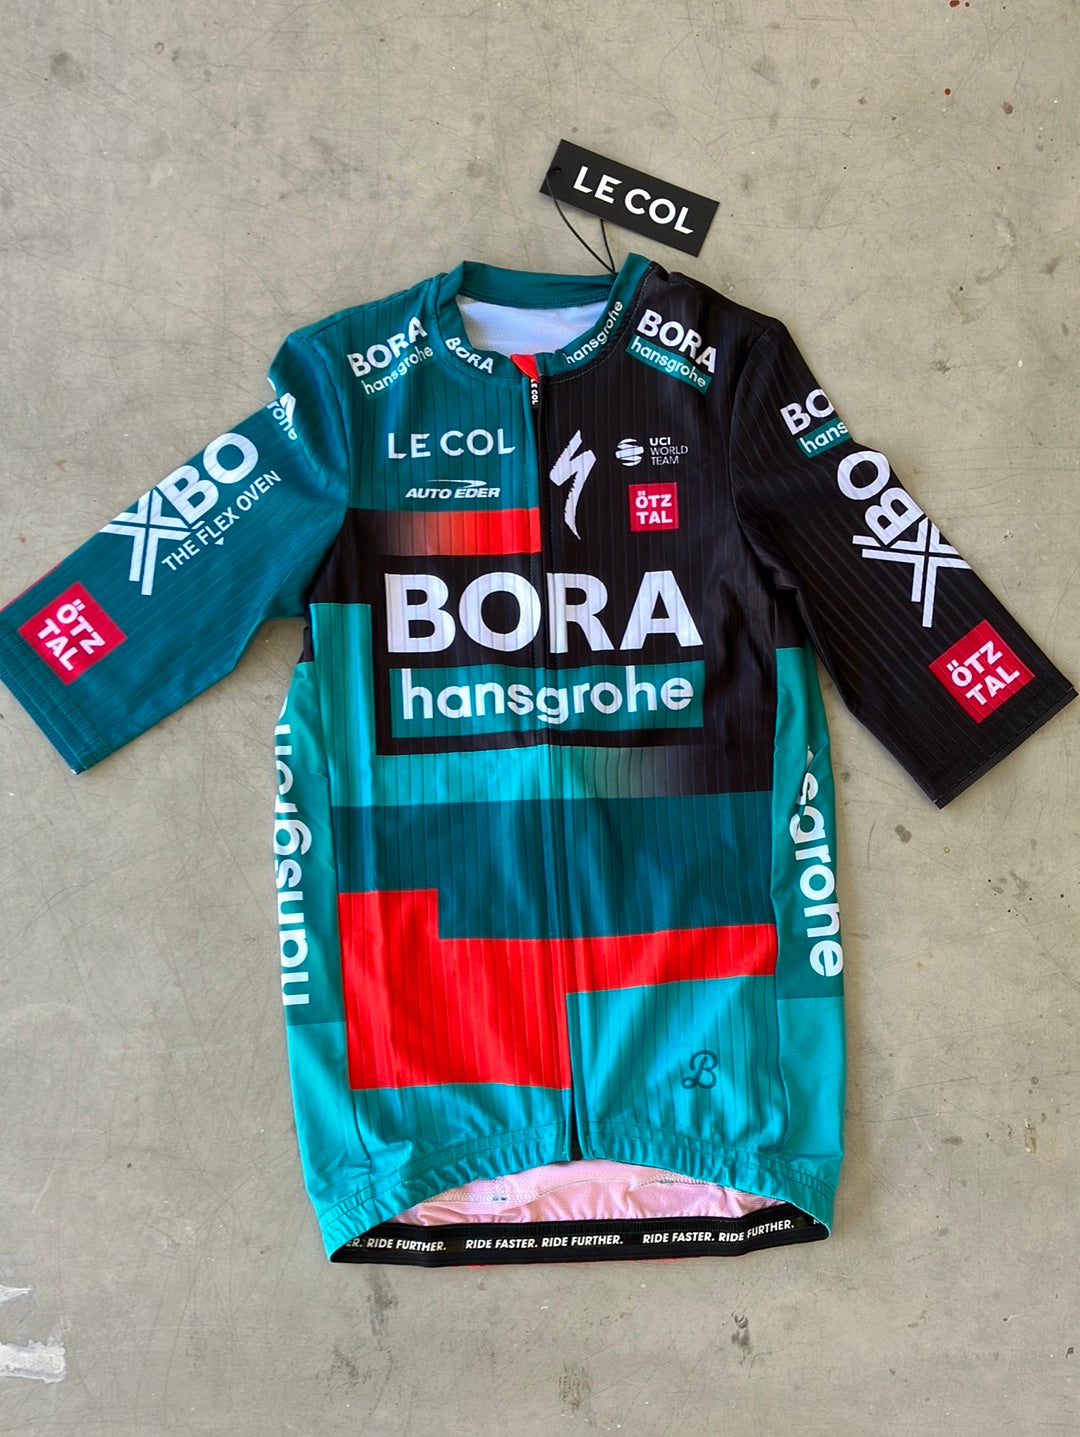 Aero Jersey Summer Short Sleeve | Le Col | Bora Hansgrohe | Pro-Issued Cycling Kit